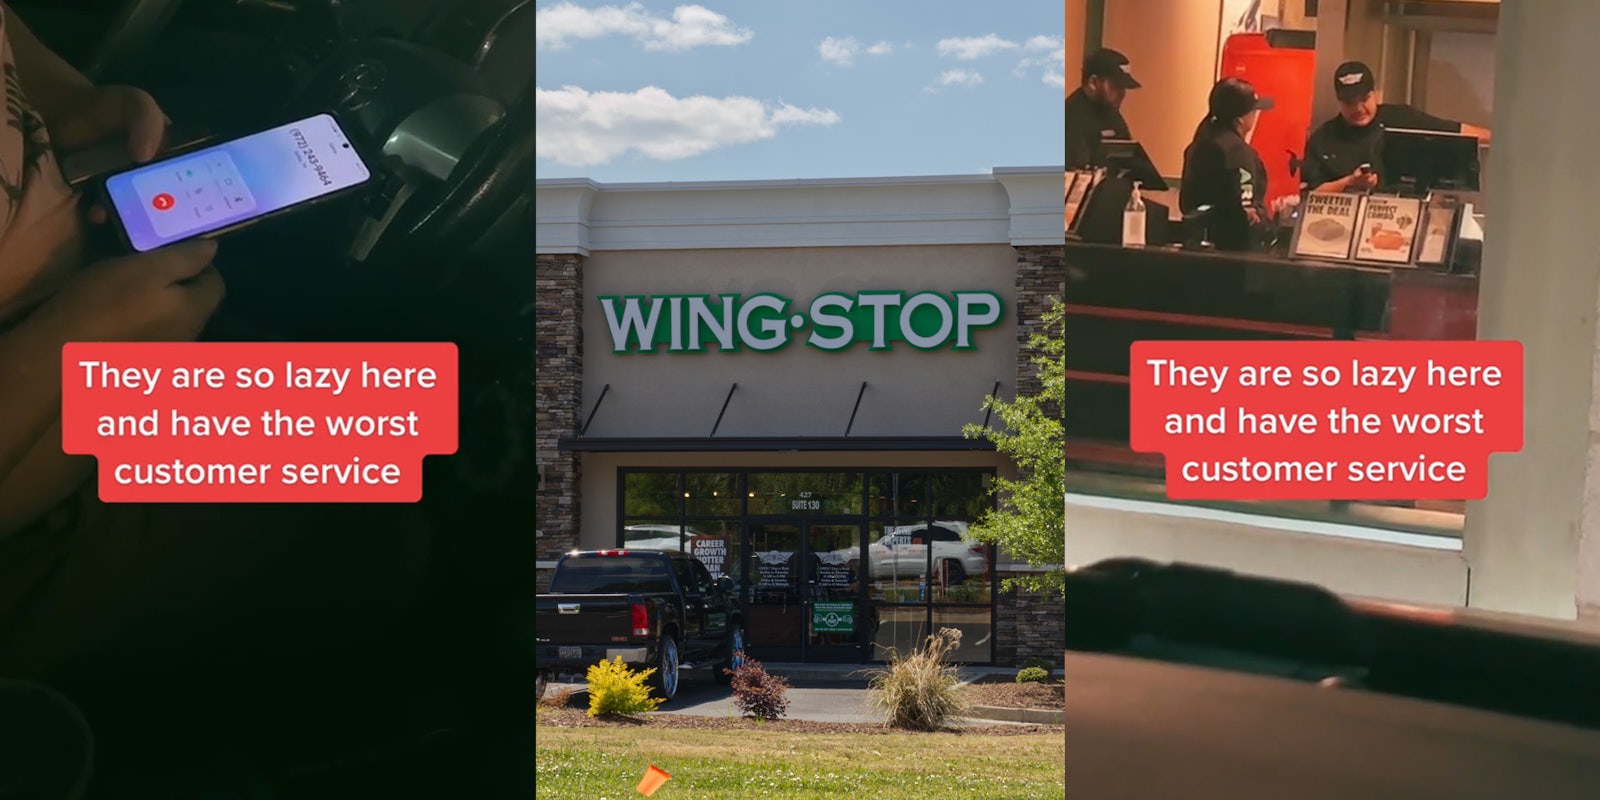 woman holding phone in car calling Wing Stop with caption 'They are so lazy here and have the worst customer service' (l) Wing Stop sign on building with blue sky (c) Wing stop workers looking at phone with caption 'They are so lazy here and have the worst customer service' (r)